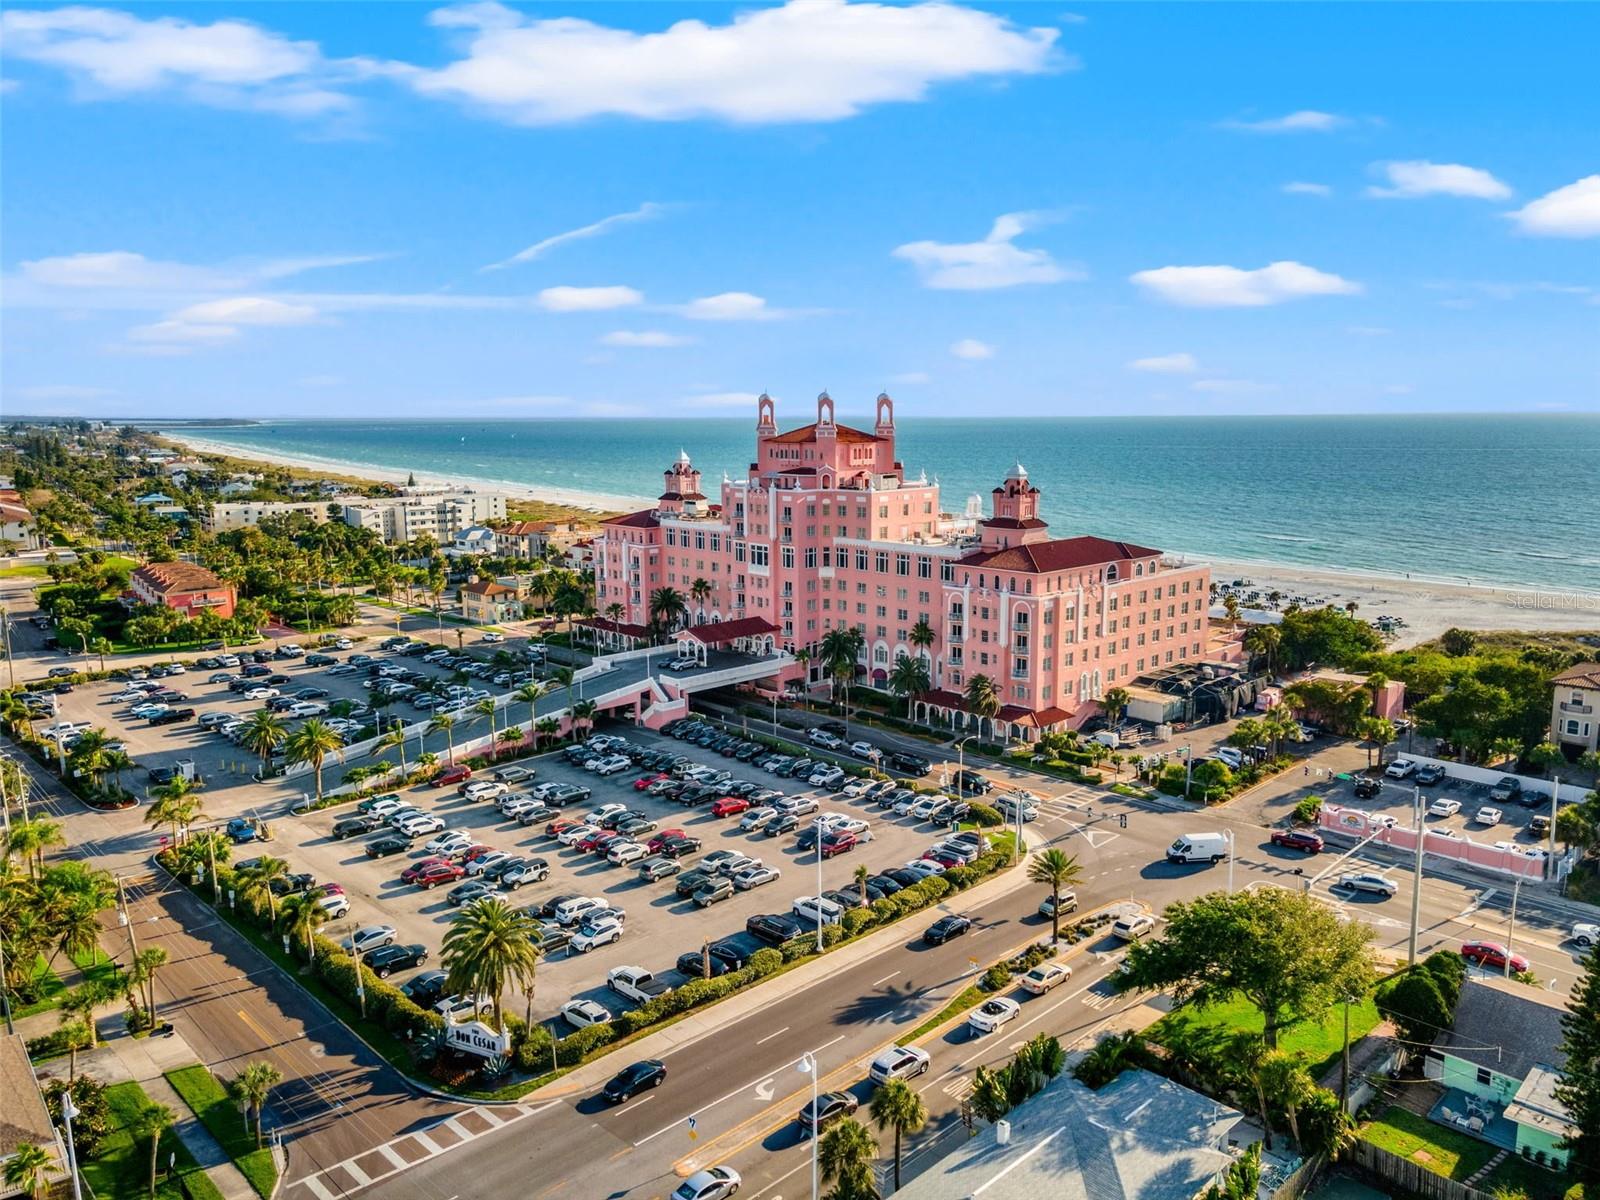 The beautiful Don CeSar hotel is just down the street